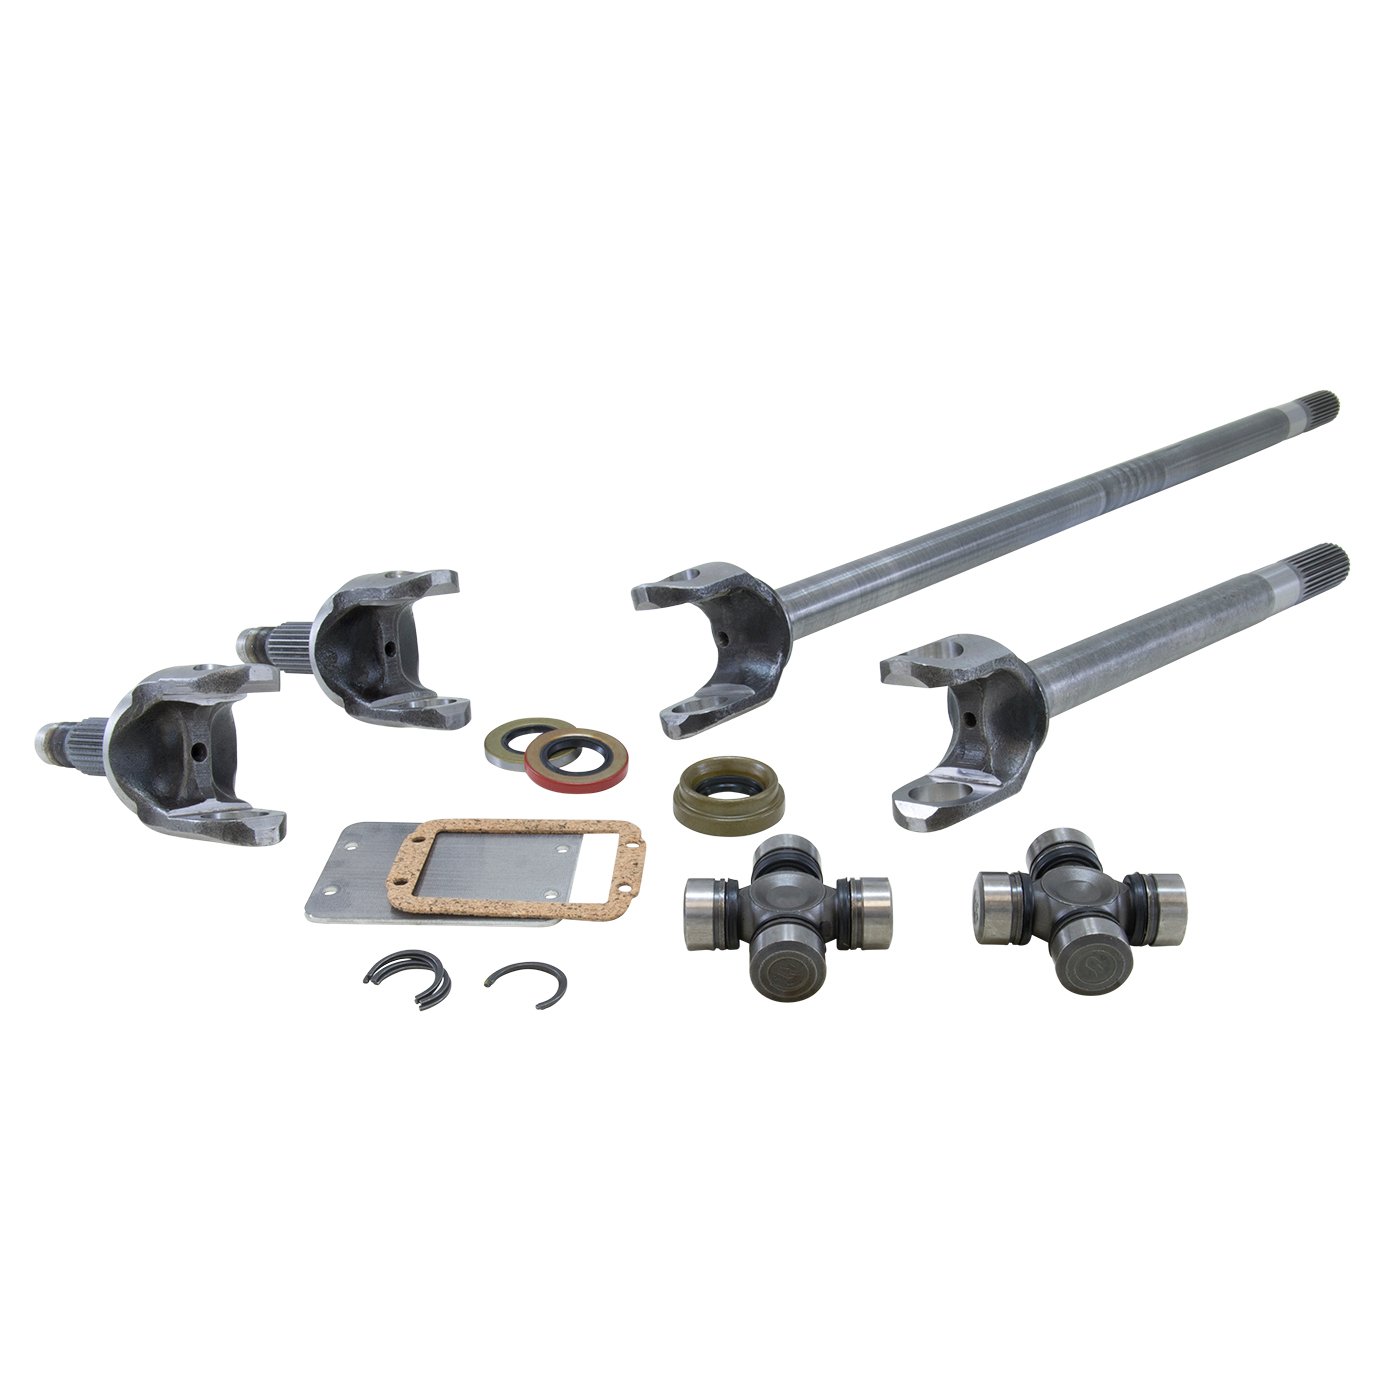 Front Chrome-Moly Axle & Grizzly Locker Kit Jeep